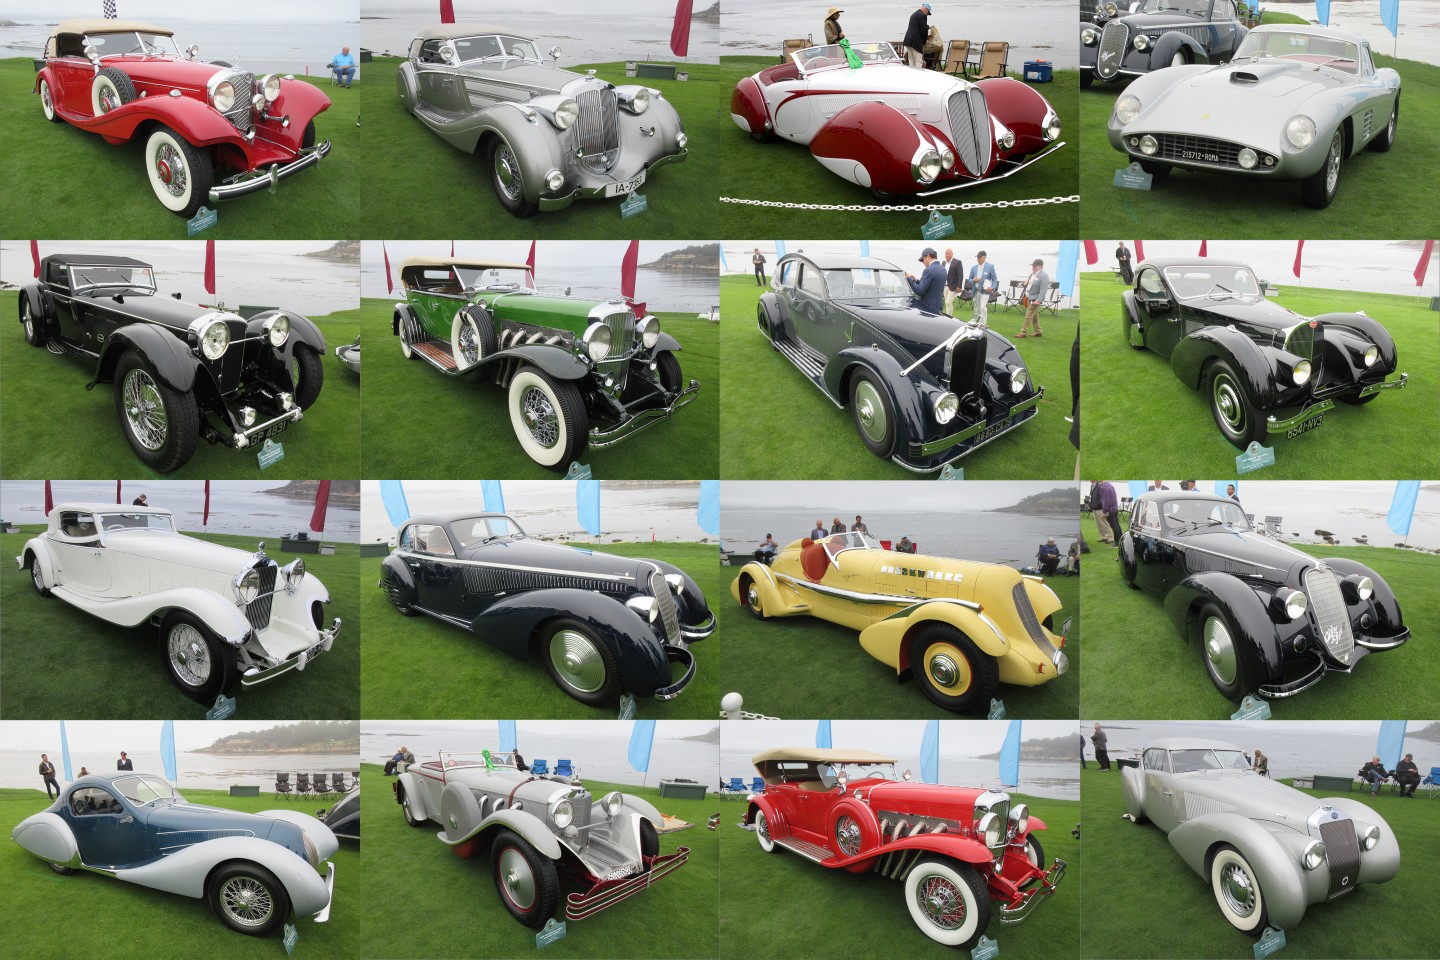 A montage of a sampling of the images in the gallery section of this article - all of these cars are previous winners of the Pebble Beach Concours d’Elegance Best of Show and the high resolution images are in the image gallery